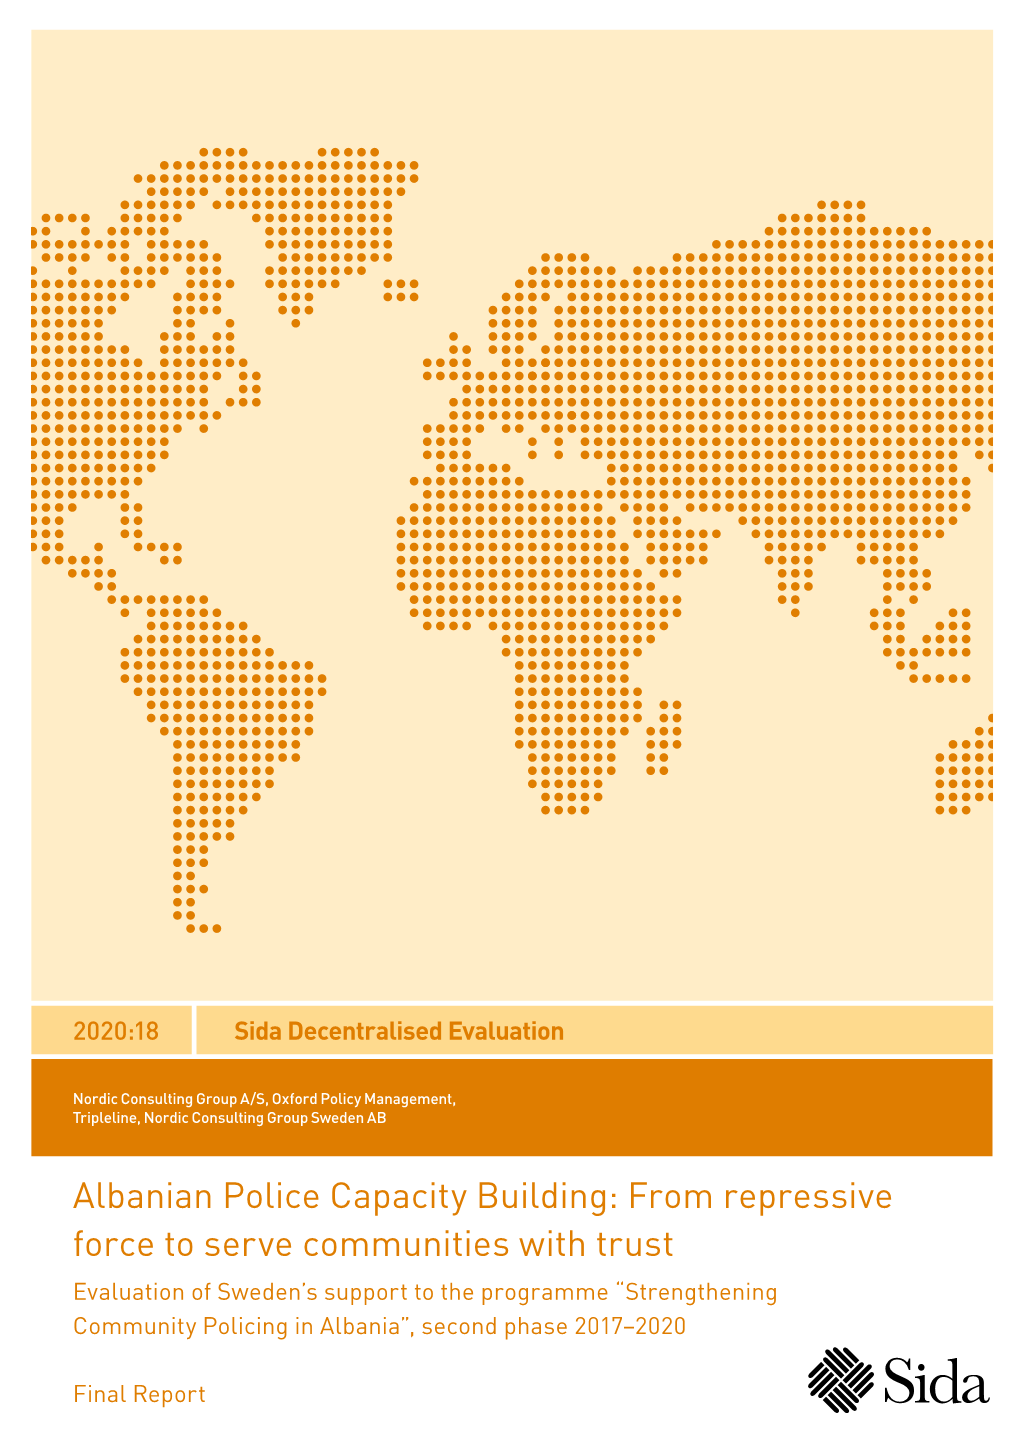 DE2020:18 Albanian Police Capacity Building: from Repressive Force To